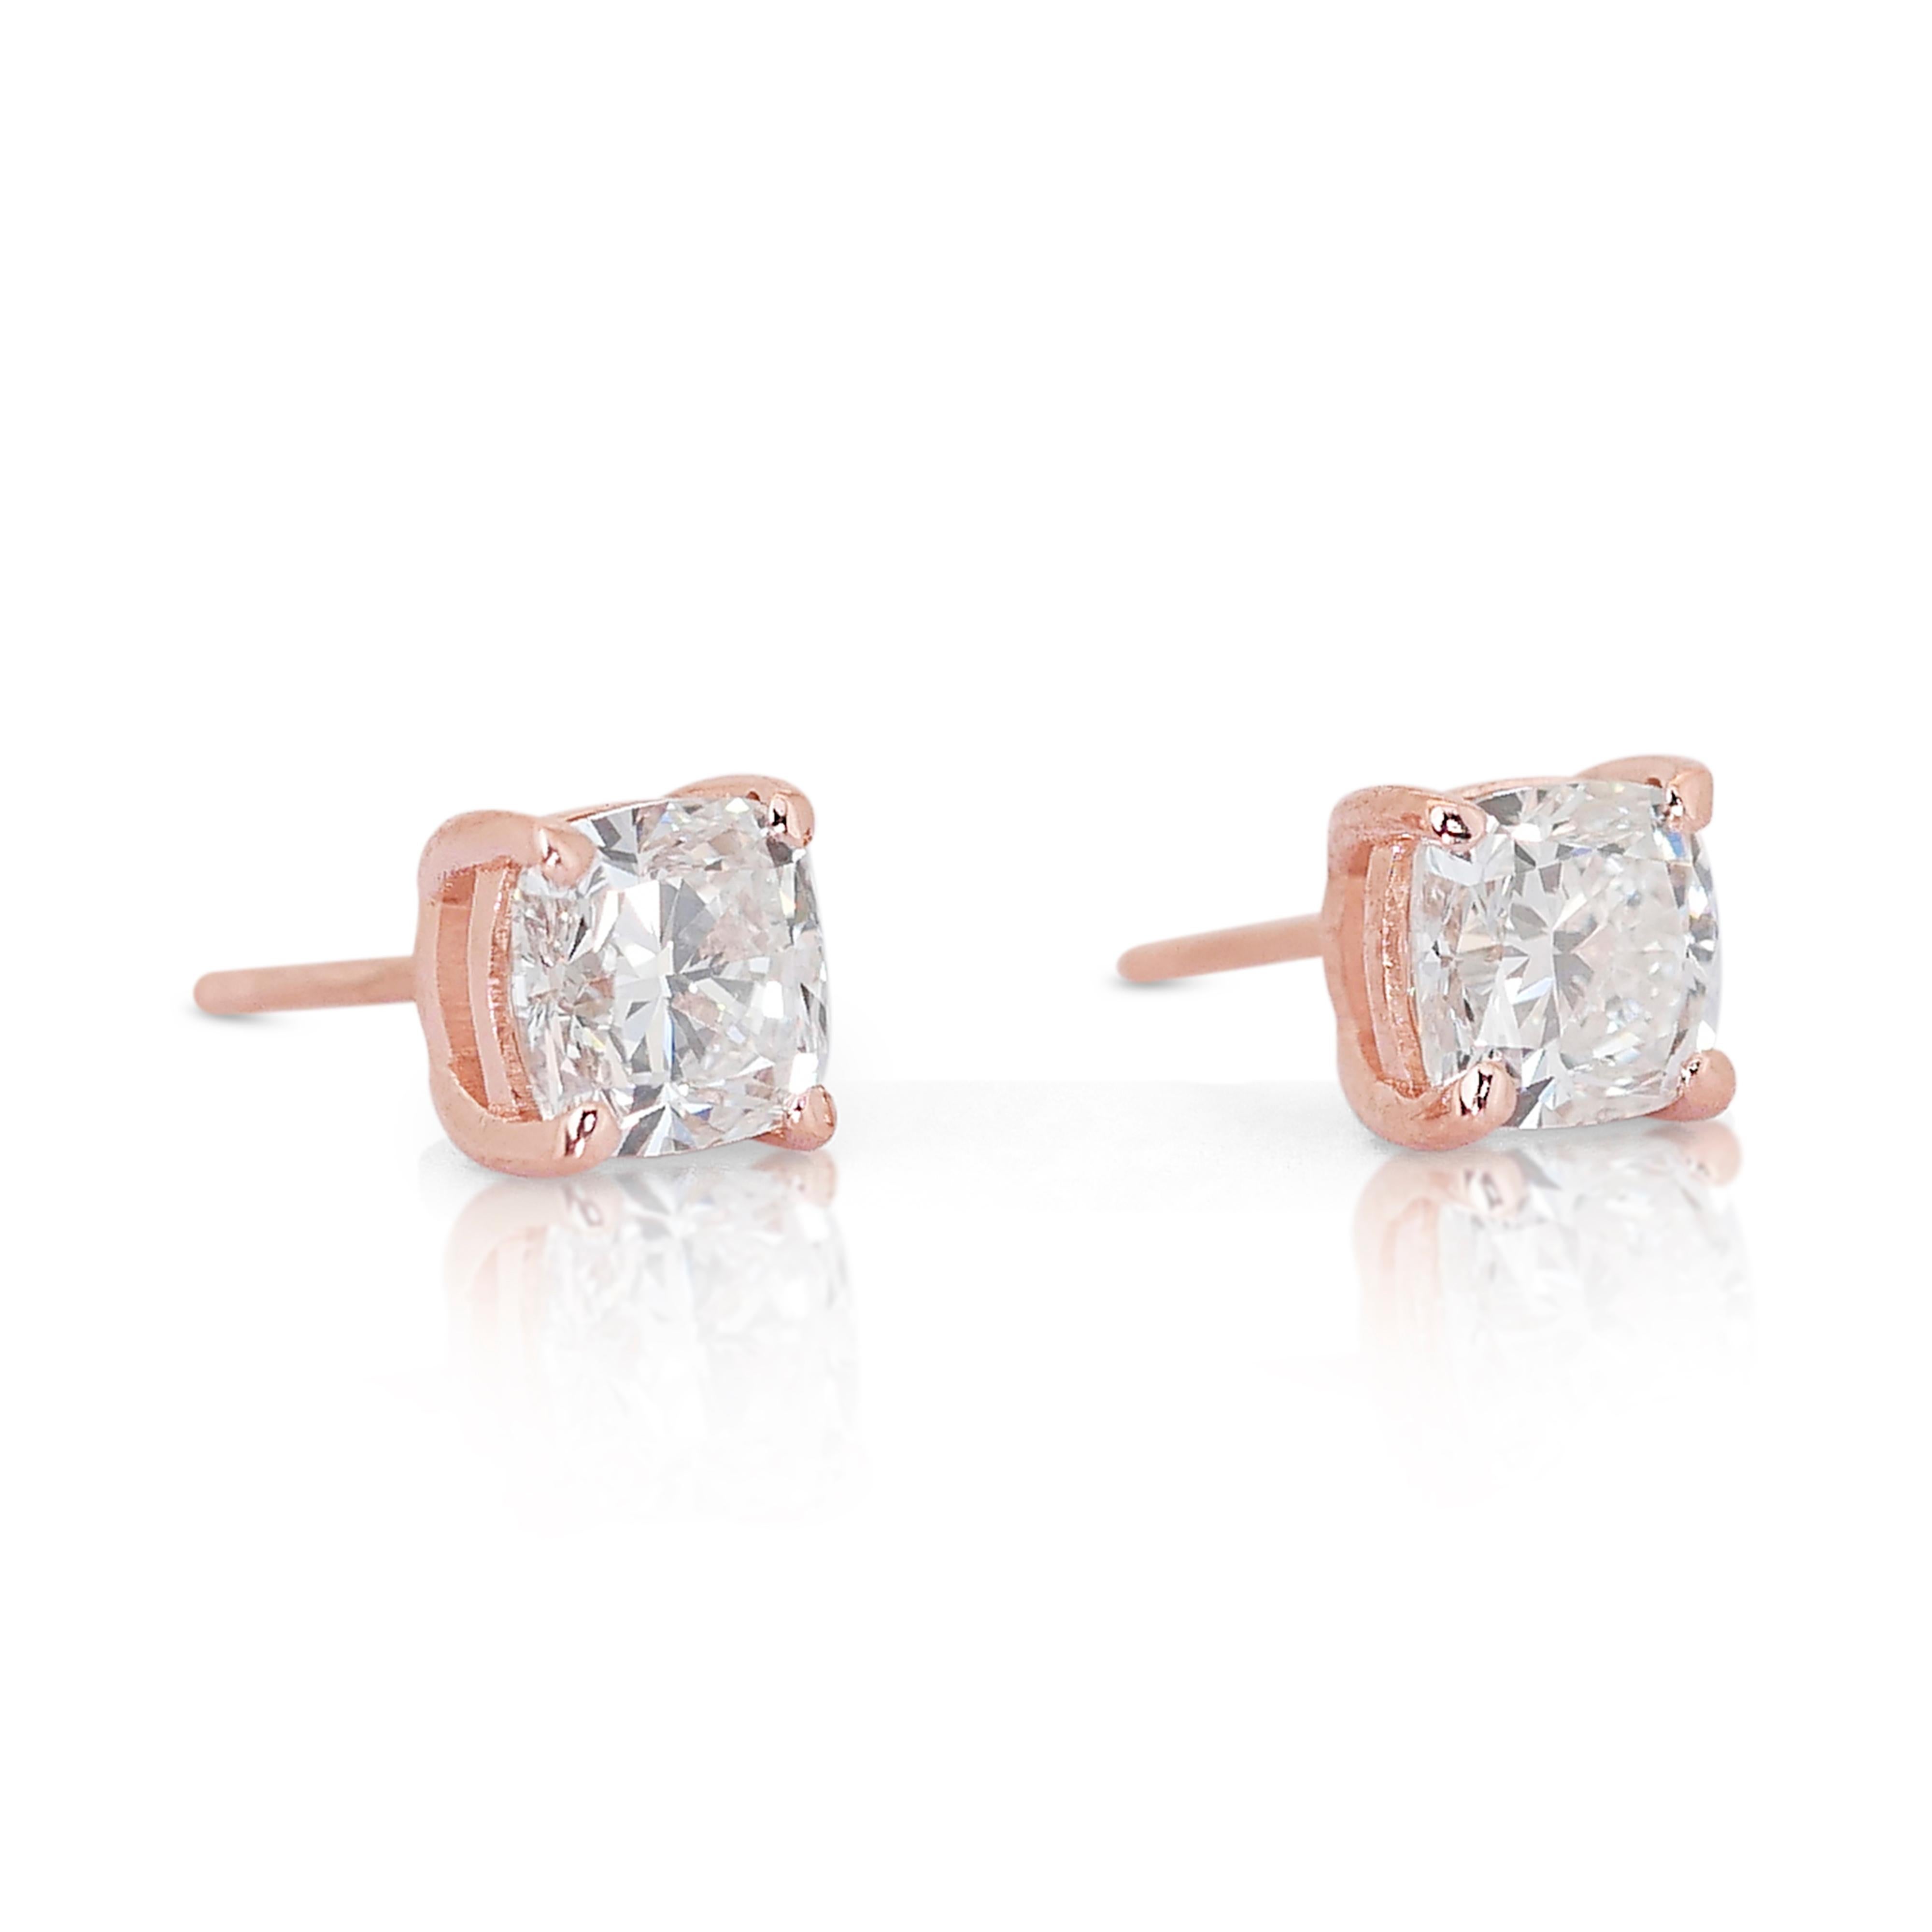 Stunning 14k Rose Gold Natural Diamonds Stud Earrings w/1.61 ct - IGI Certified In New Condition For Sale In רמת גן, IL